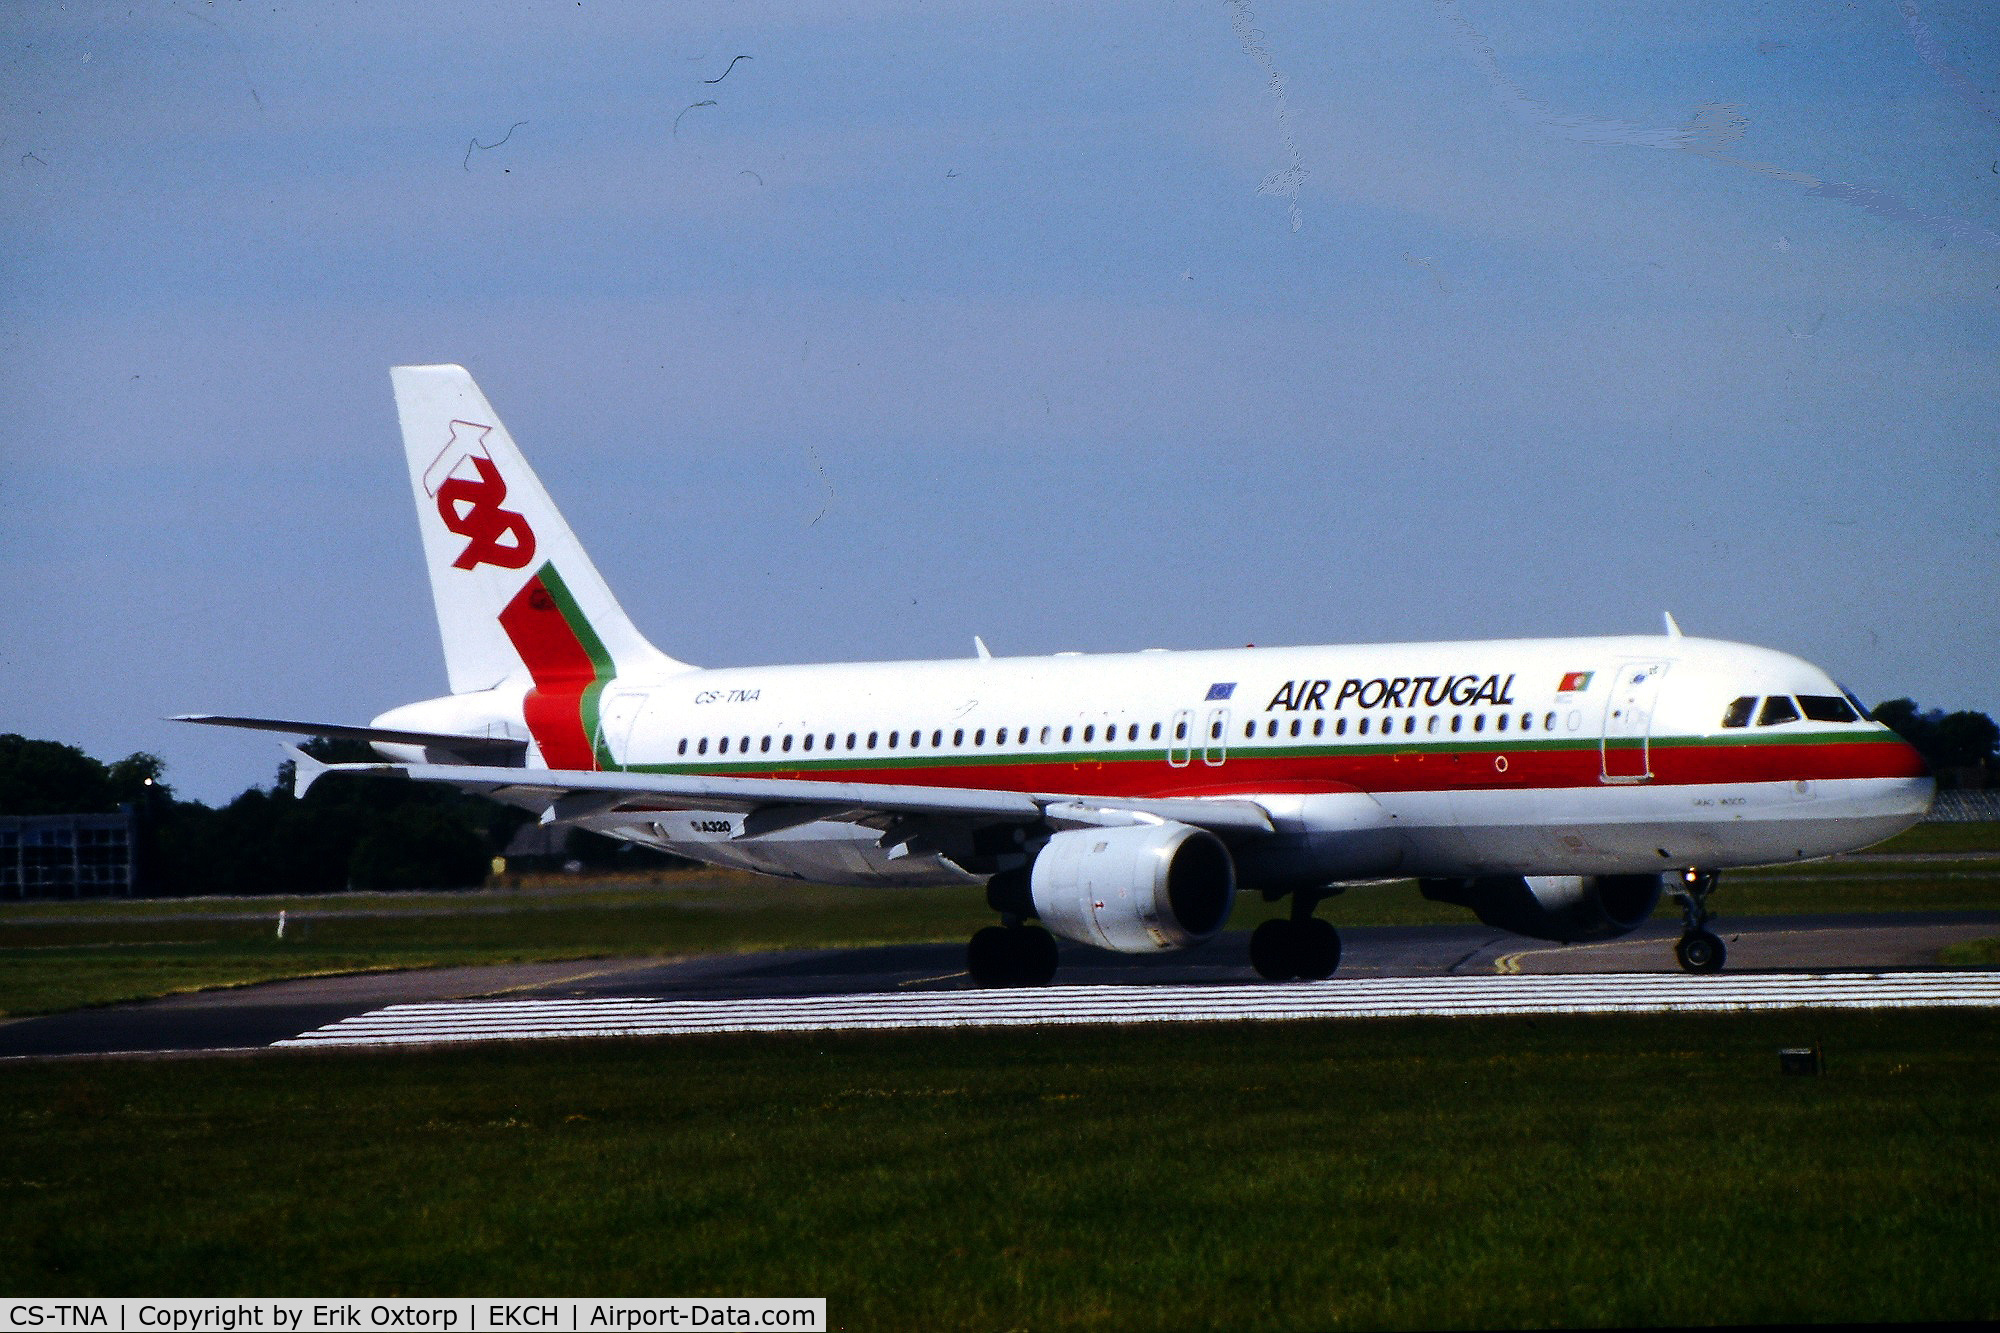 CS-TNA, 1991 Airbus A320-211 C/N 185, CS-TNA ready for take off rw 04R
Scanned slide